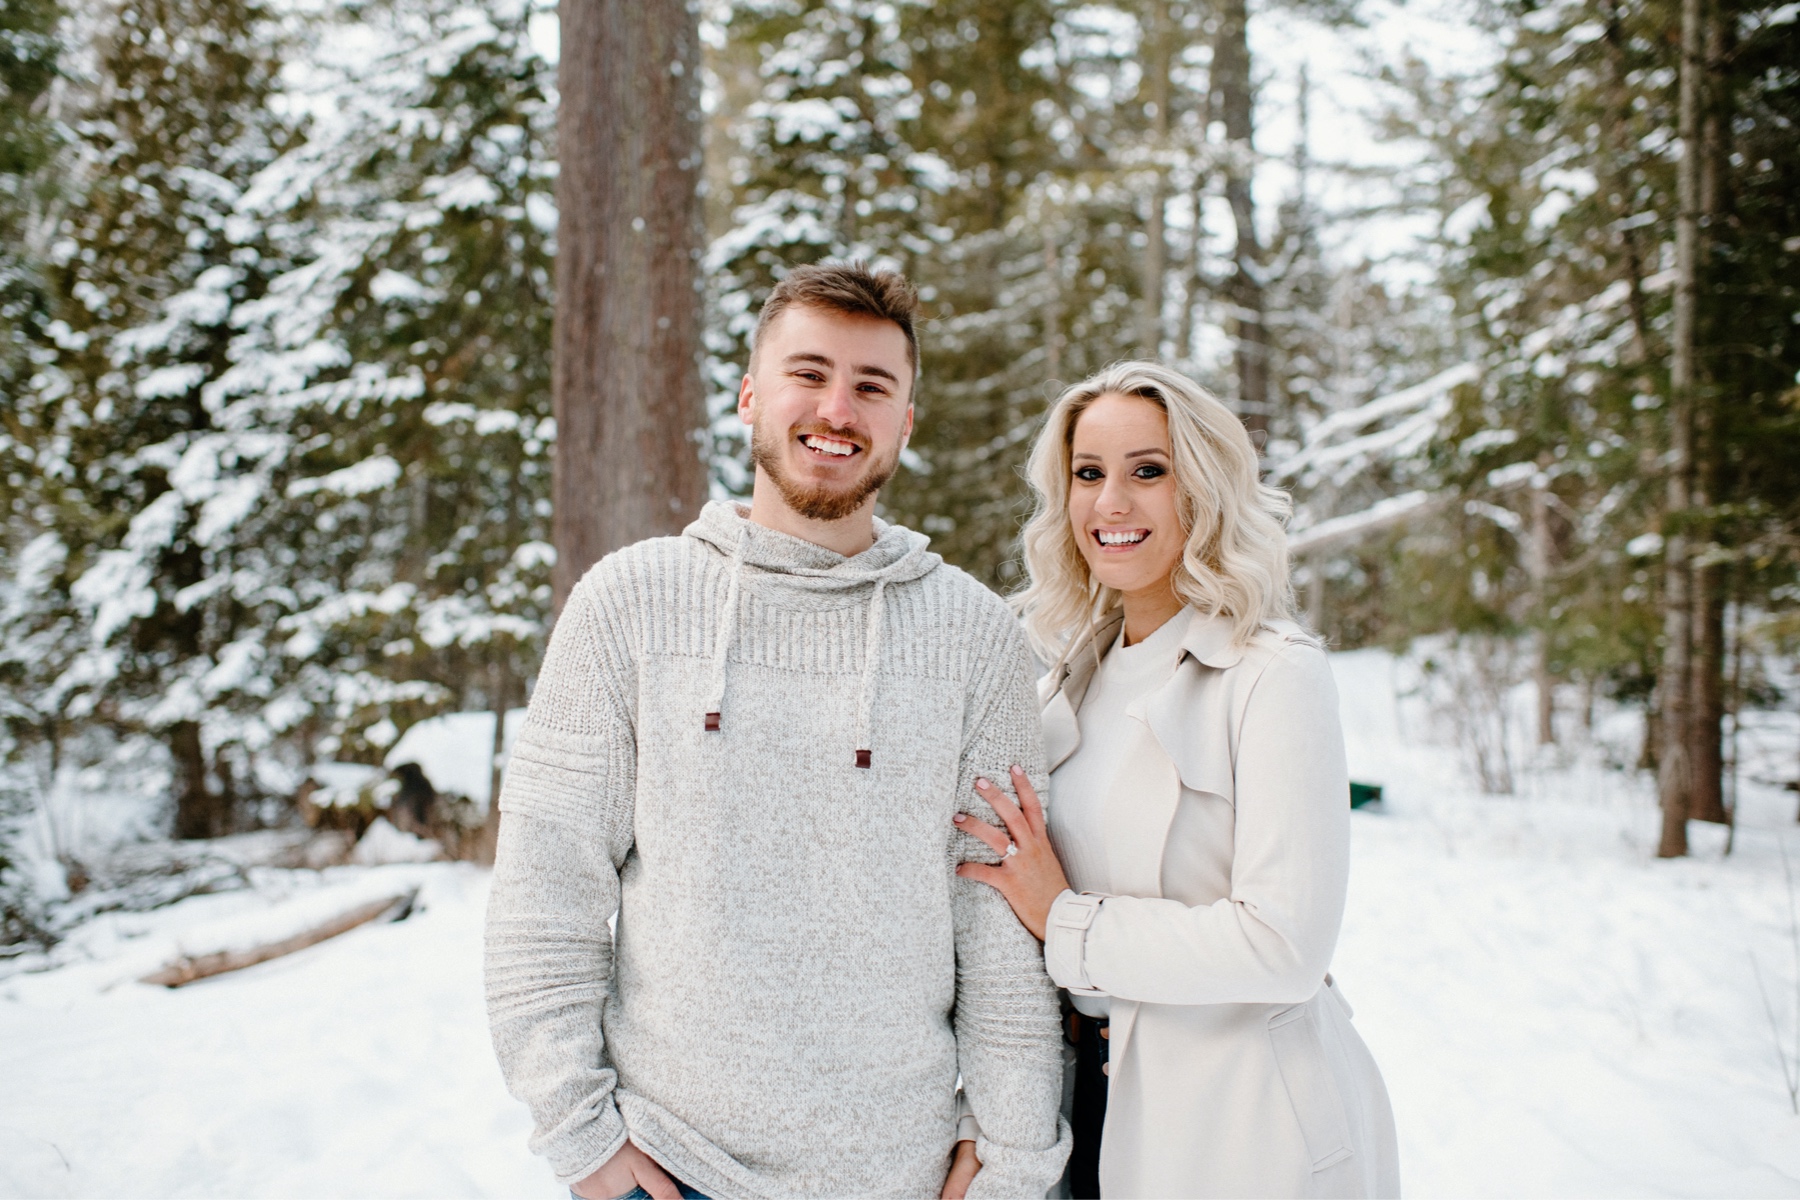 Couple posing in a snowy wooded area